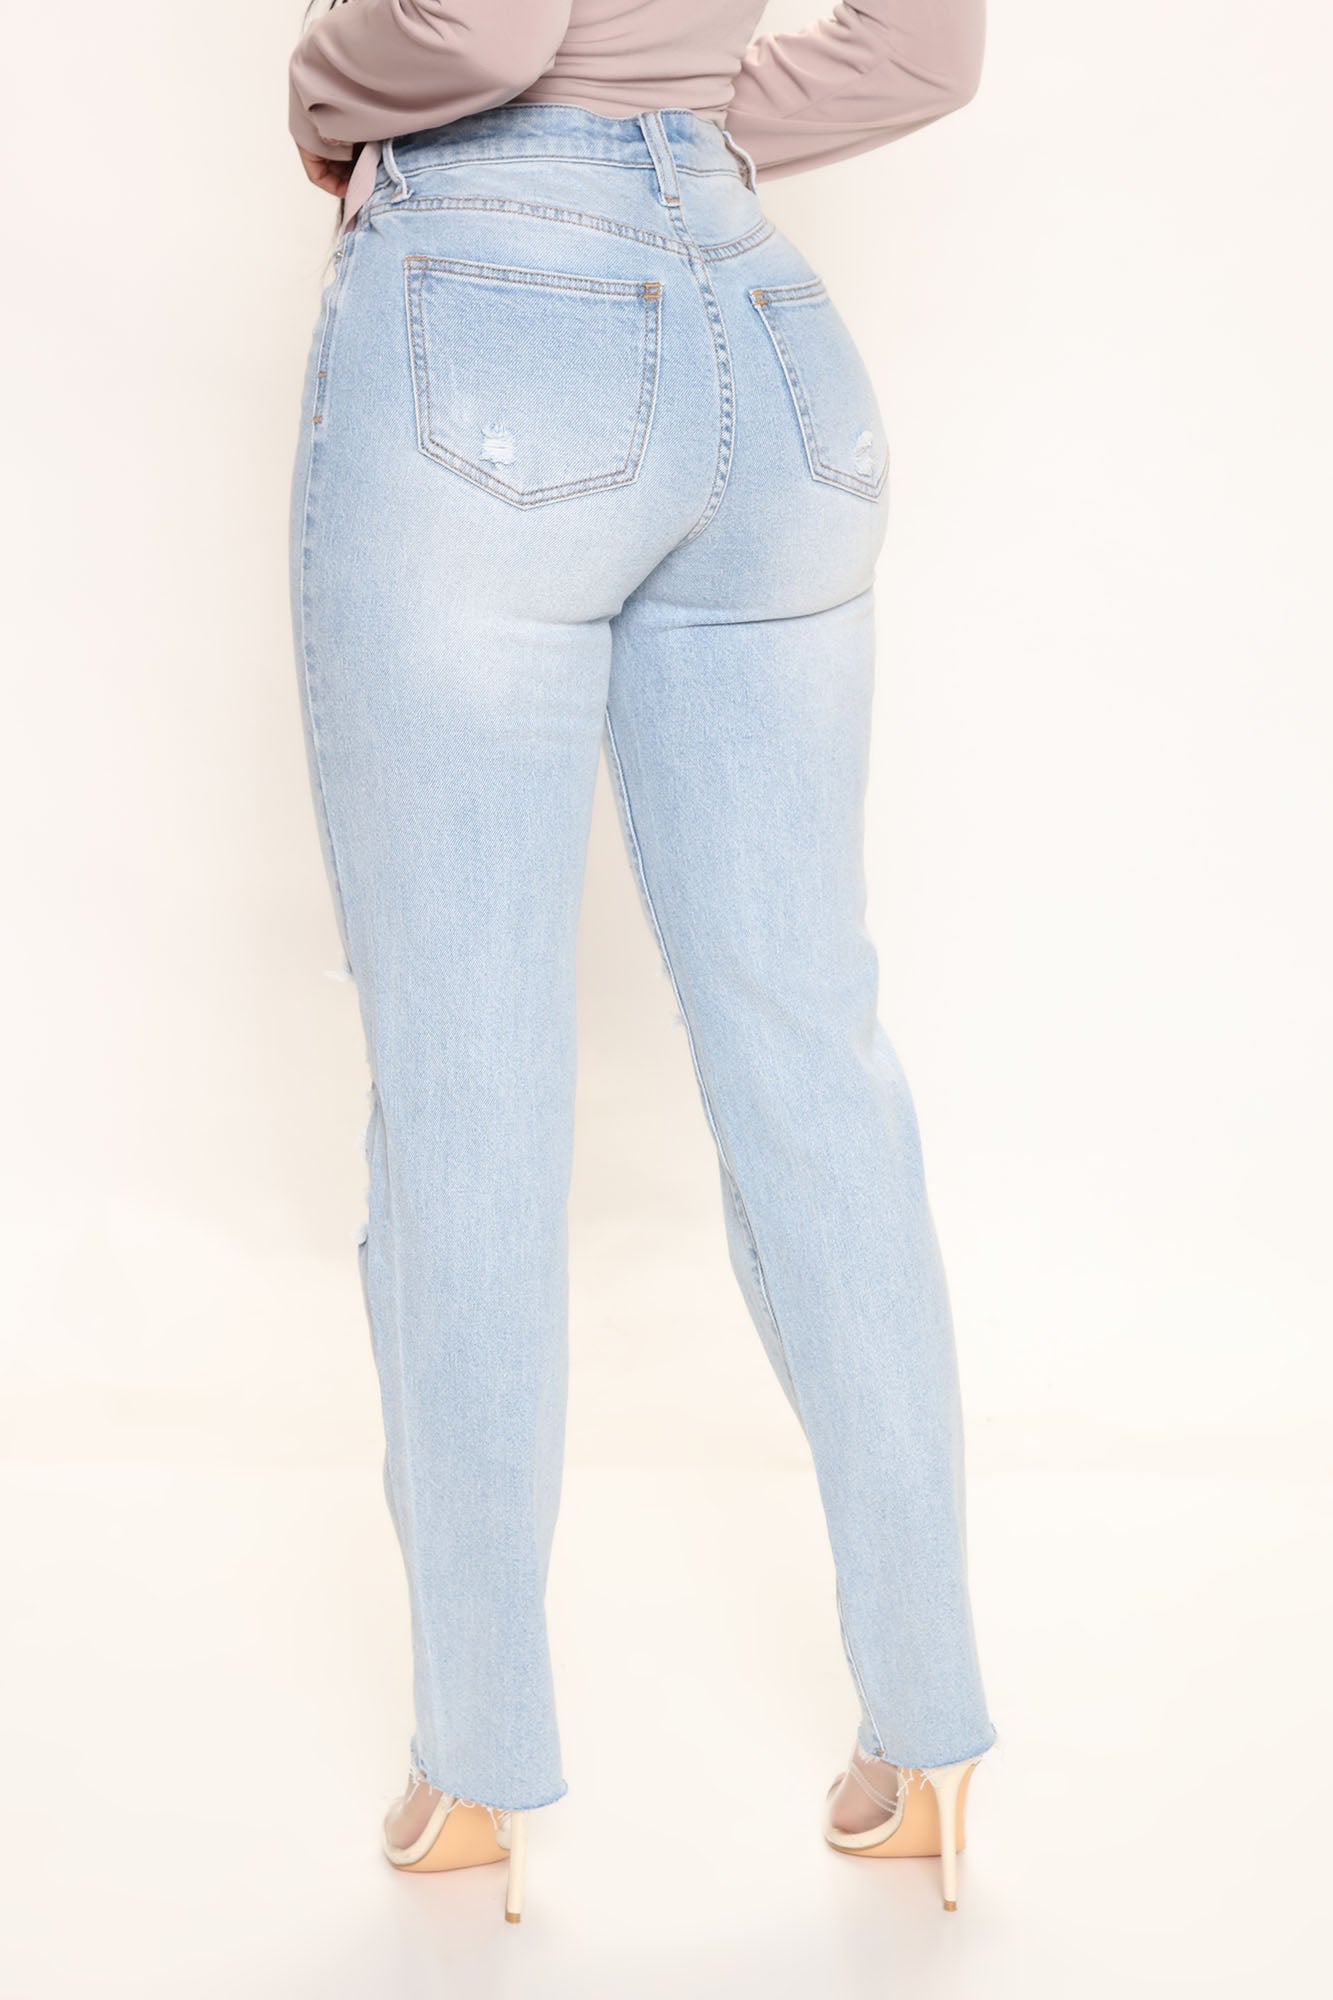 Be Straight With Me Distressed Jeans - Light Blue Wash Ins Street